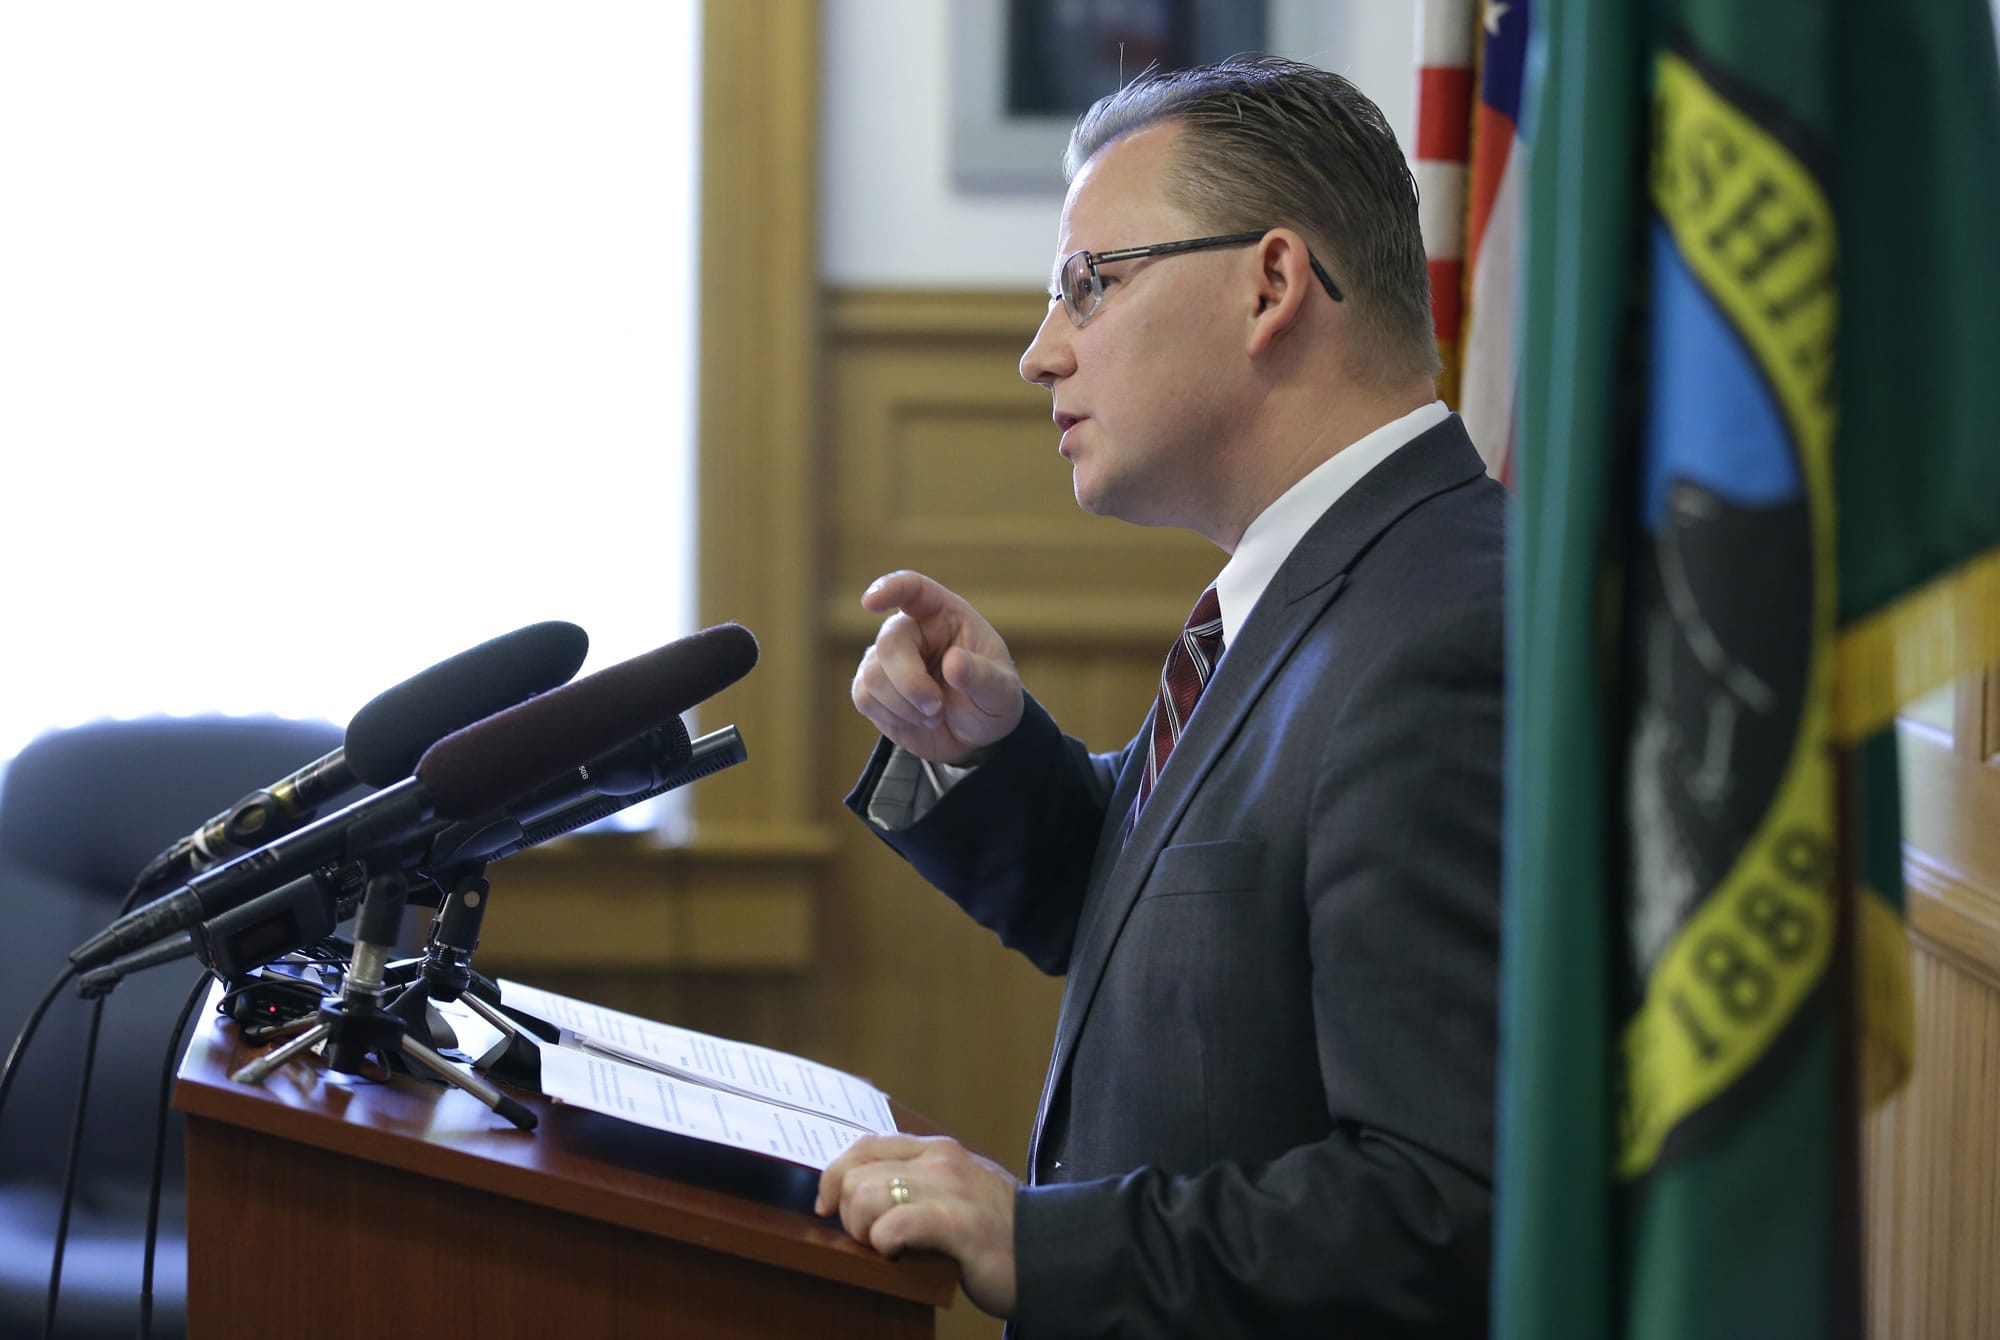 Chris Reykdal, Washington's Superintendent of Public Instruction, talks to reporters, Wednesday, May 24, 2017, in Olympia, Wash. (AP Photo/Ted S.